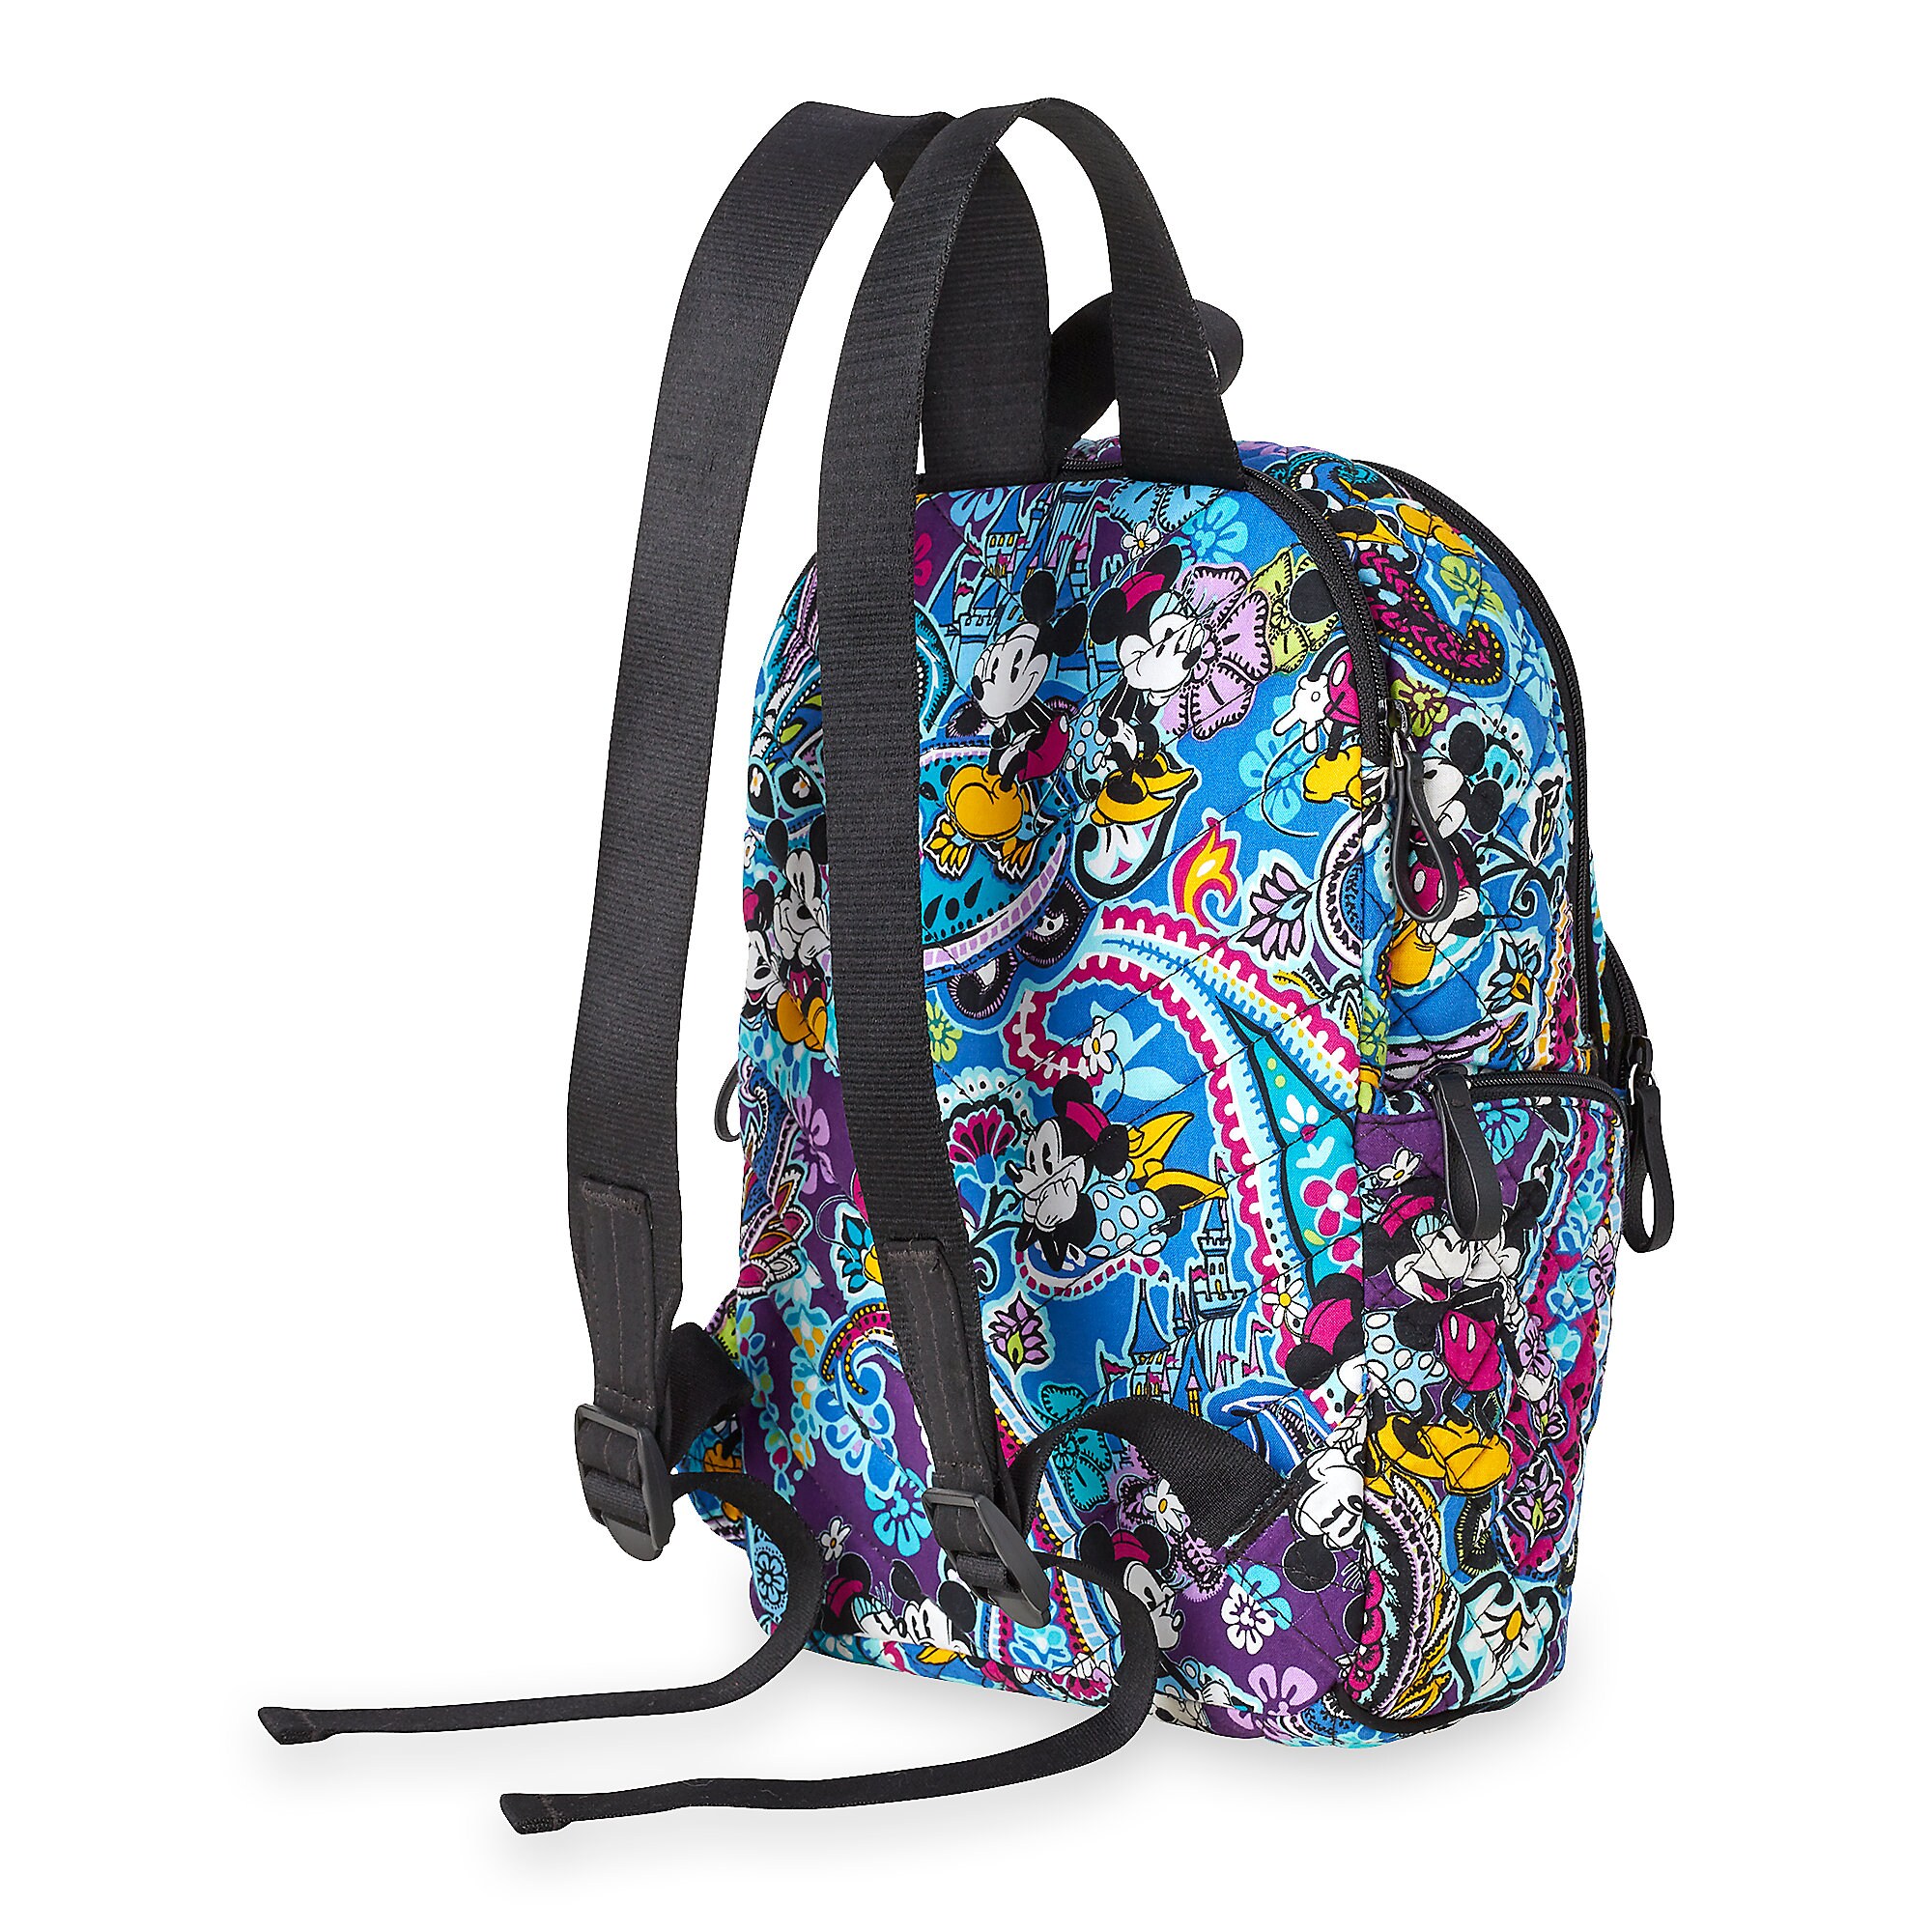 Mickey and Minnie Mouse Paisley Hadley Backpack by Vera Bradley